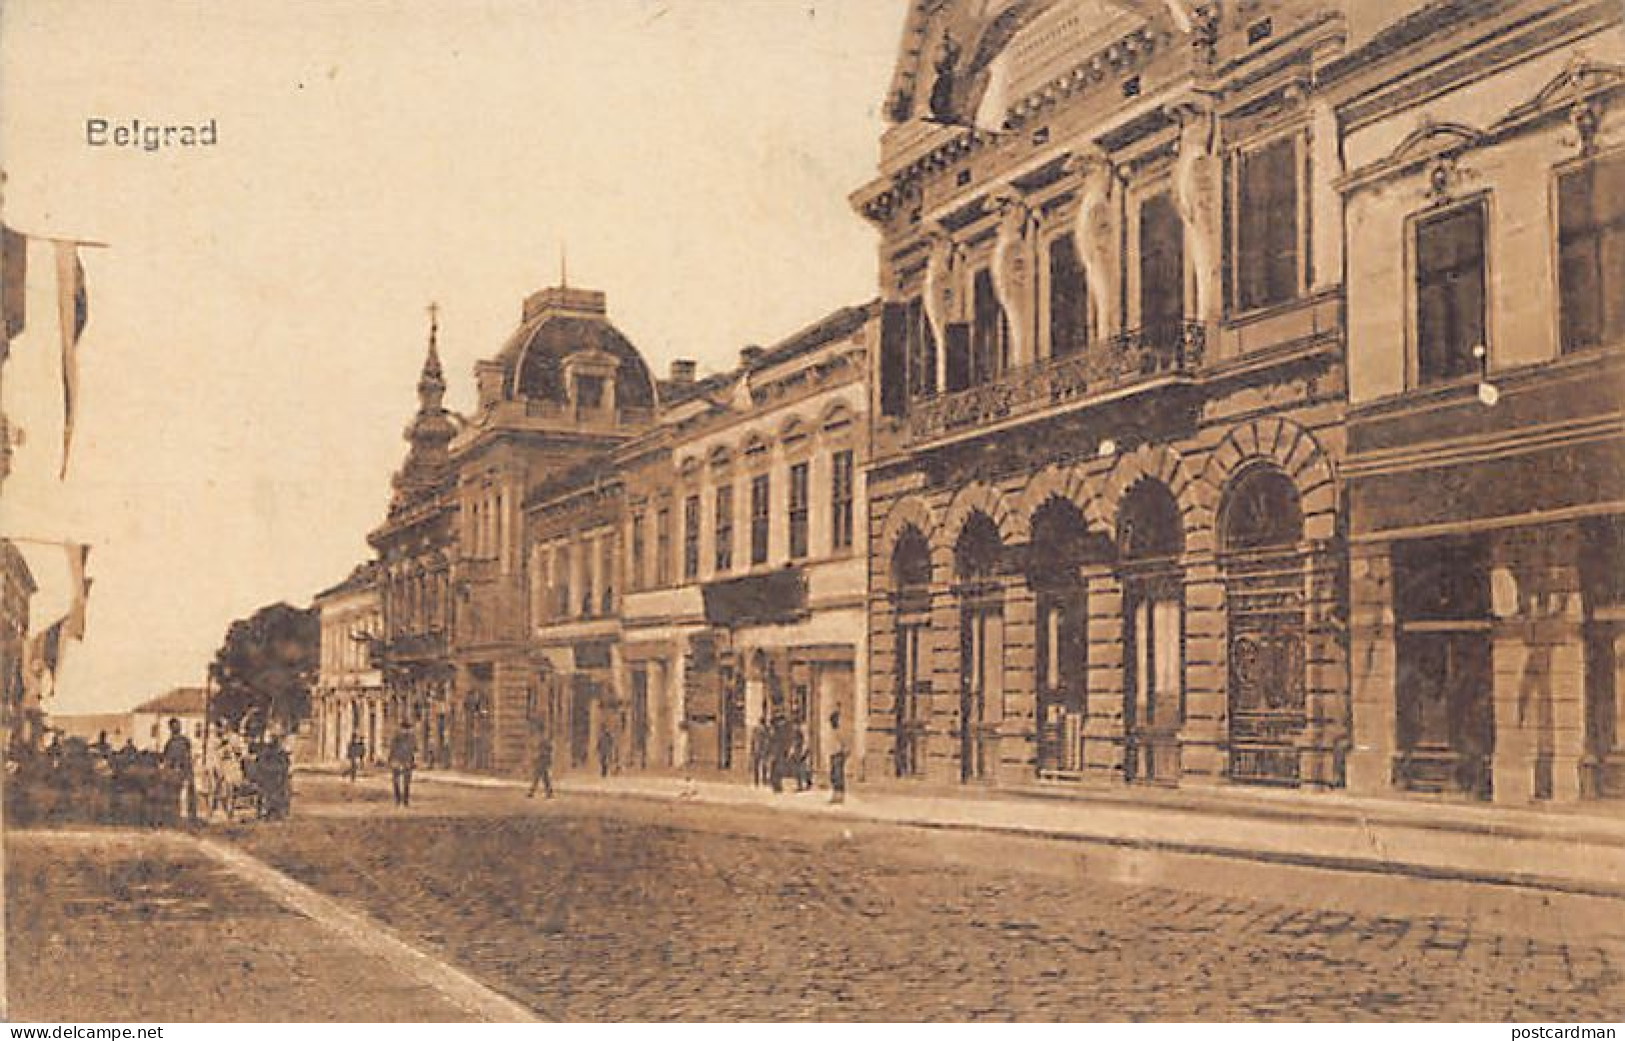 Serbia - BEOGRAD Belgrade - Postcard Published For The Austro-Hungarian Occupation Troops - Serbie